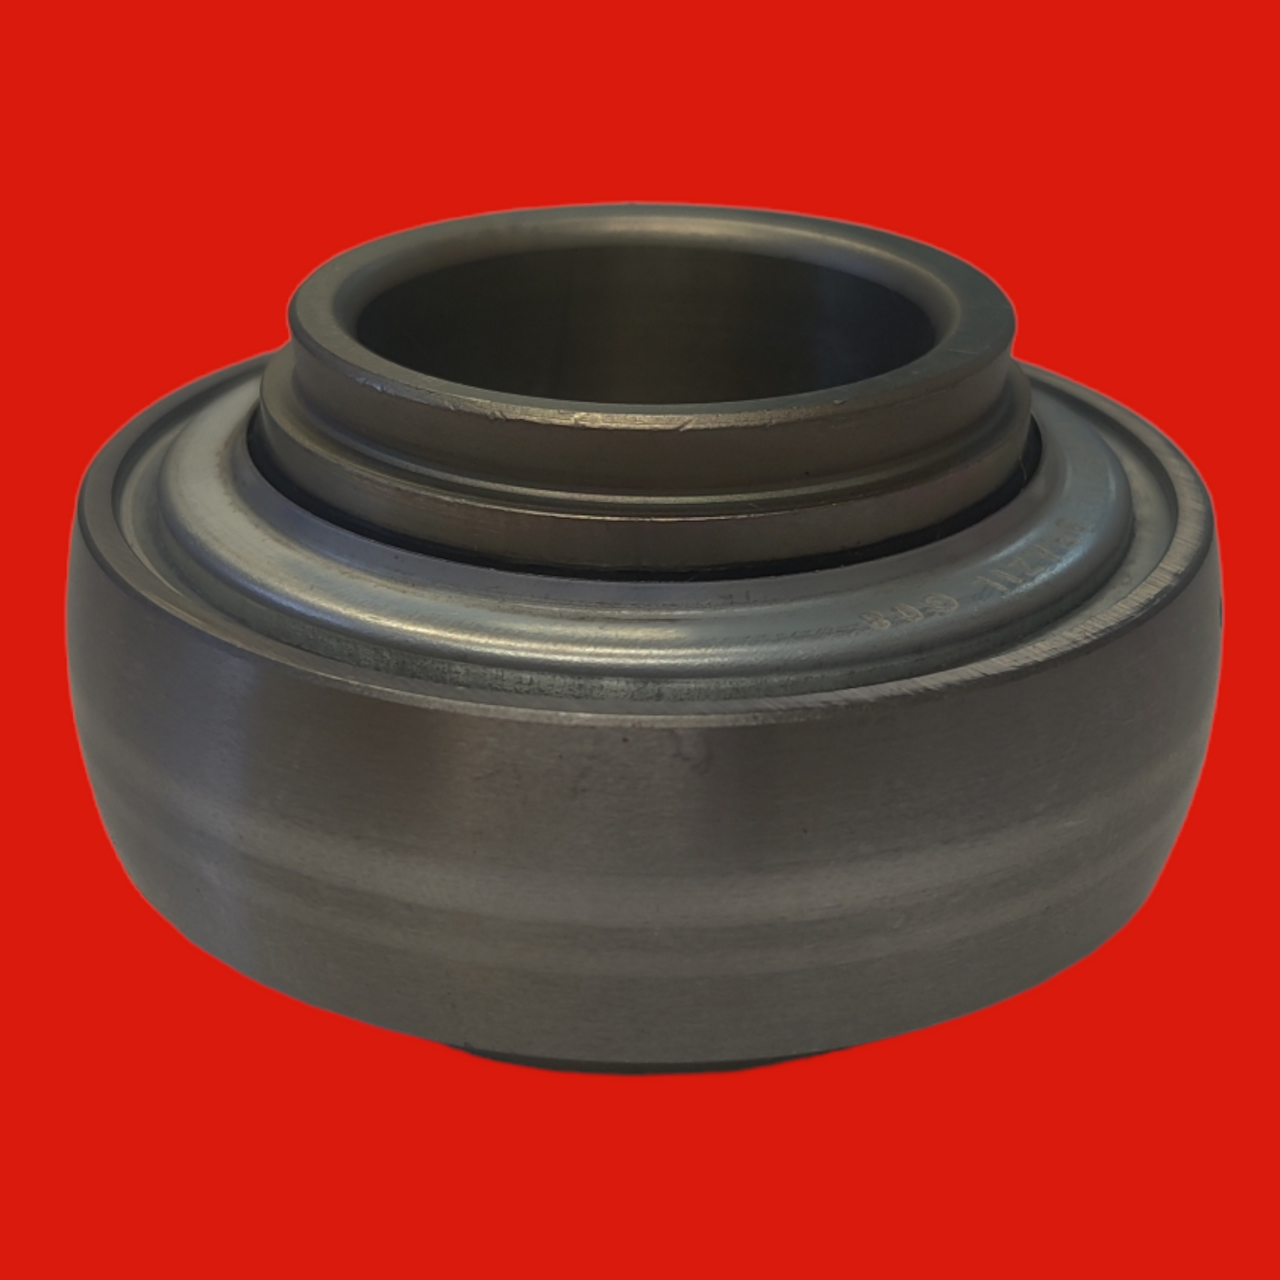 INA GE30-KRR-B-AS2/V Radial Insert Ball Bearing, Without Locking Collar